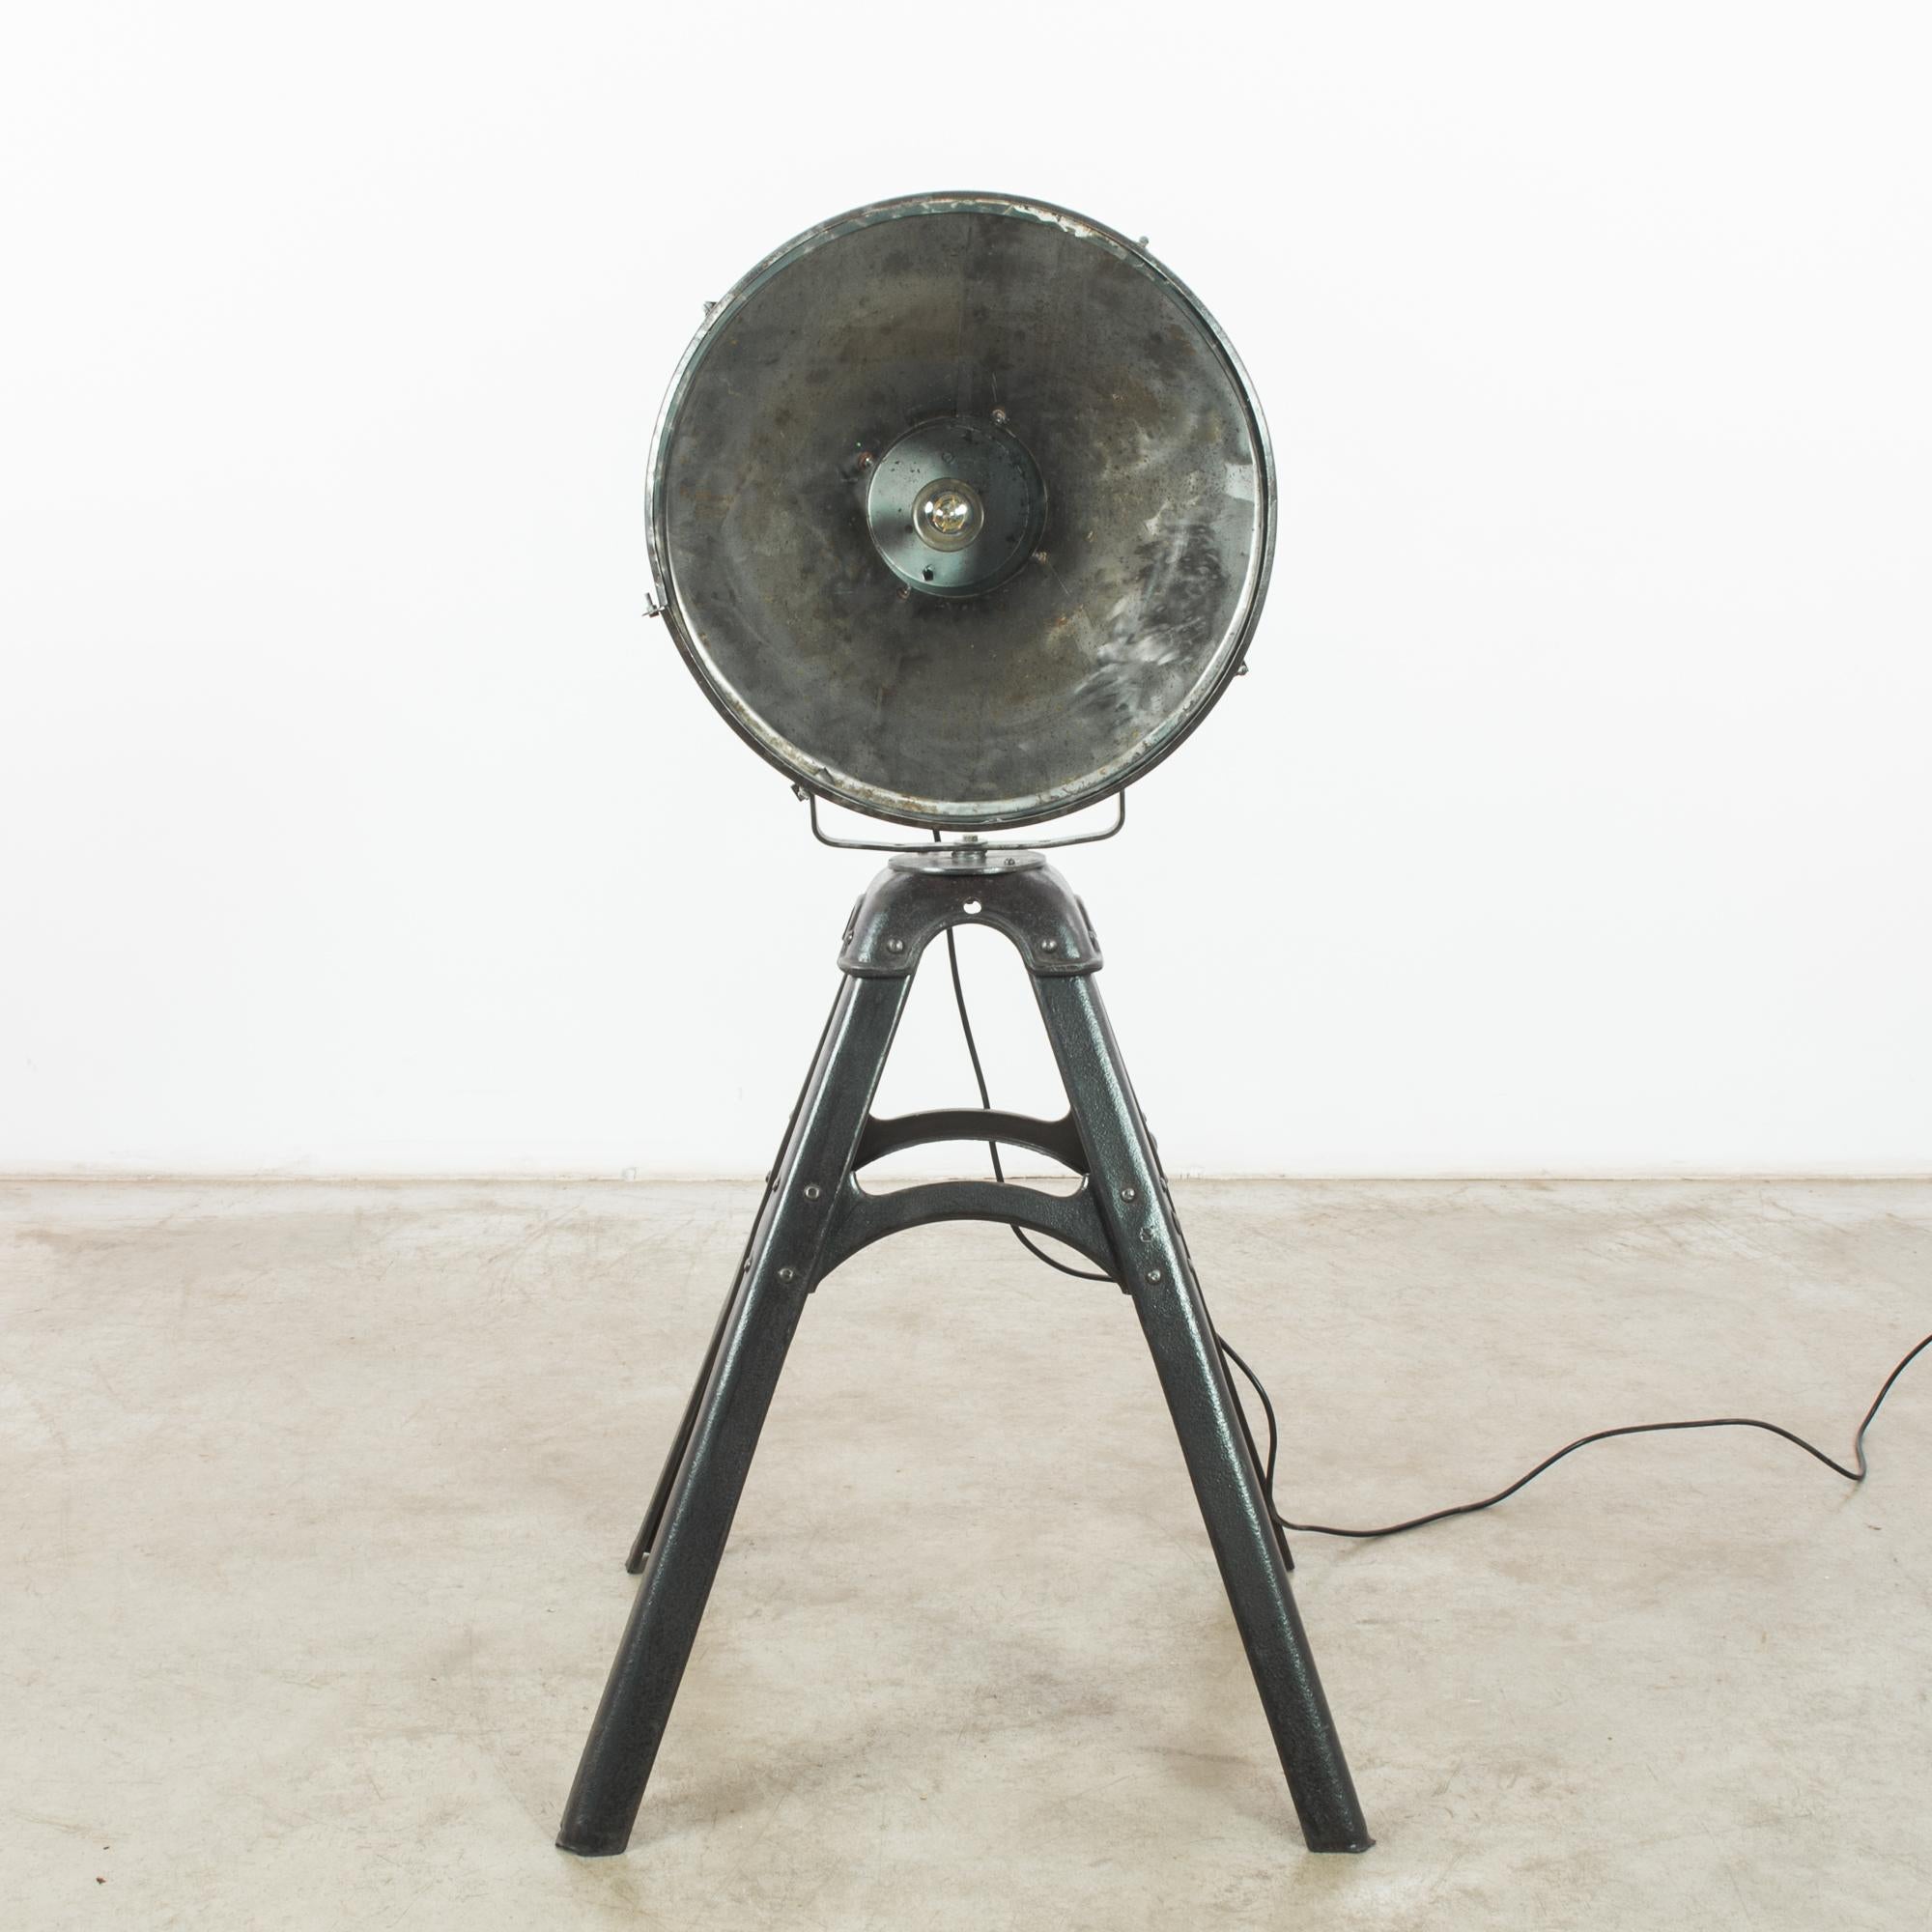 This metal floor lamp was made in the former Czechoslovakia, circa 1950. The adjustable lampshade rests on an A-frame stand with four legs. A label on the lamp indicates that it was manufactured by MSD Teplice. With its time-worn patina, this